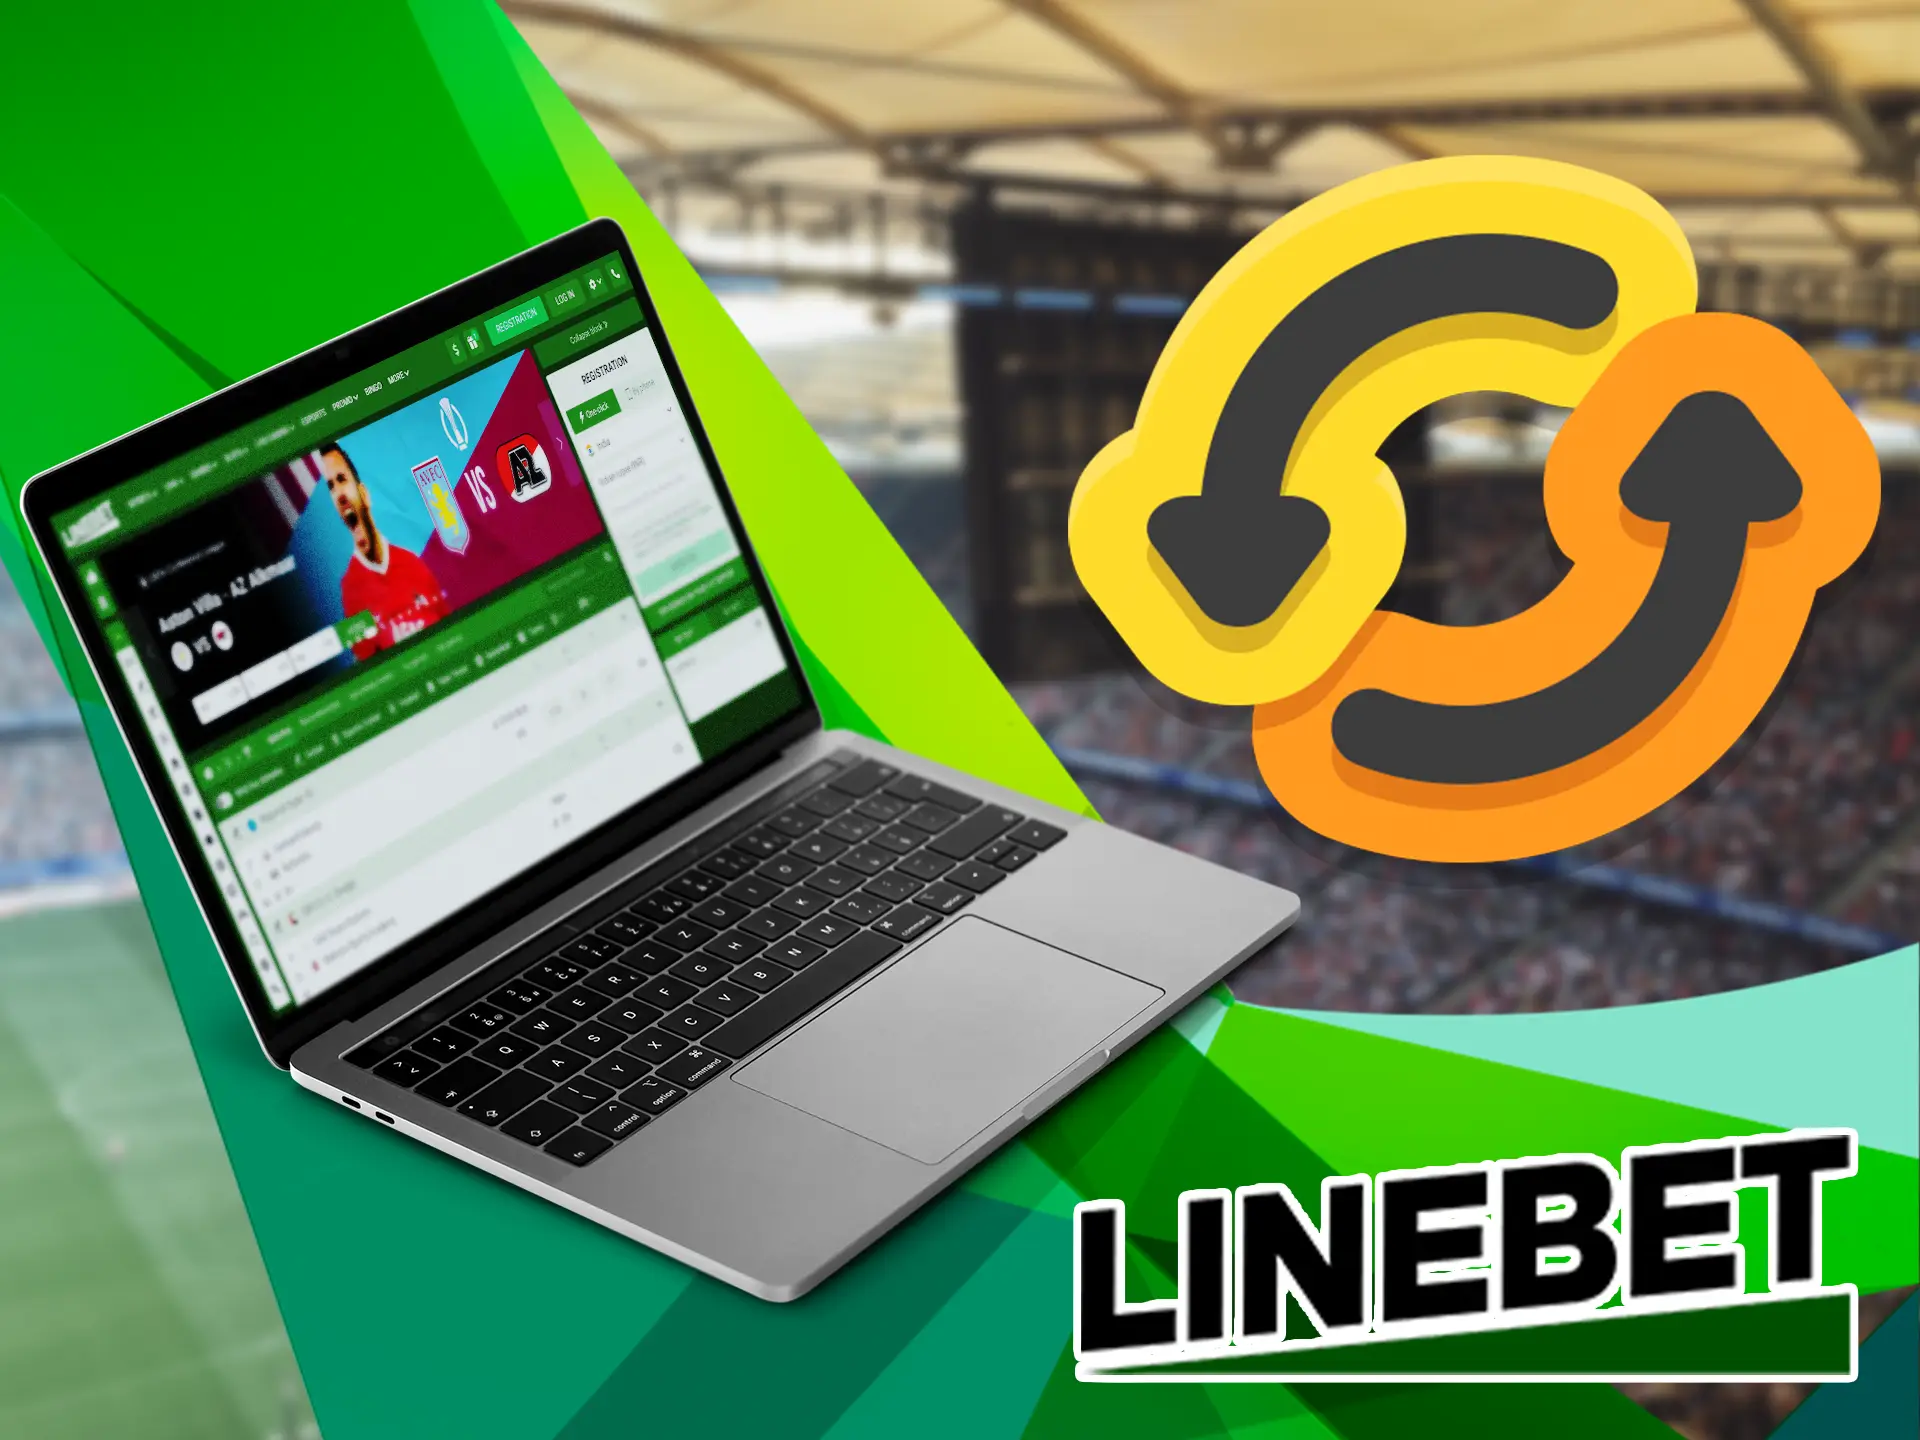 In order to get always new features and also to ensure maximum security players should get the latest version of the Linebet app.